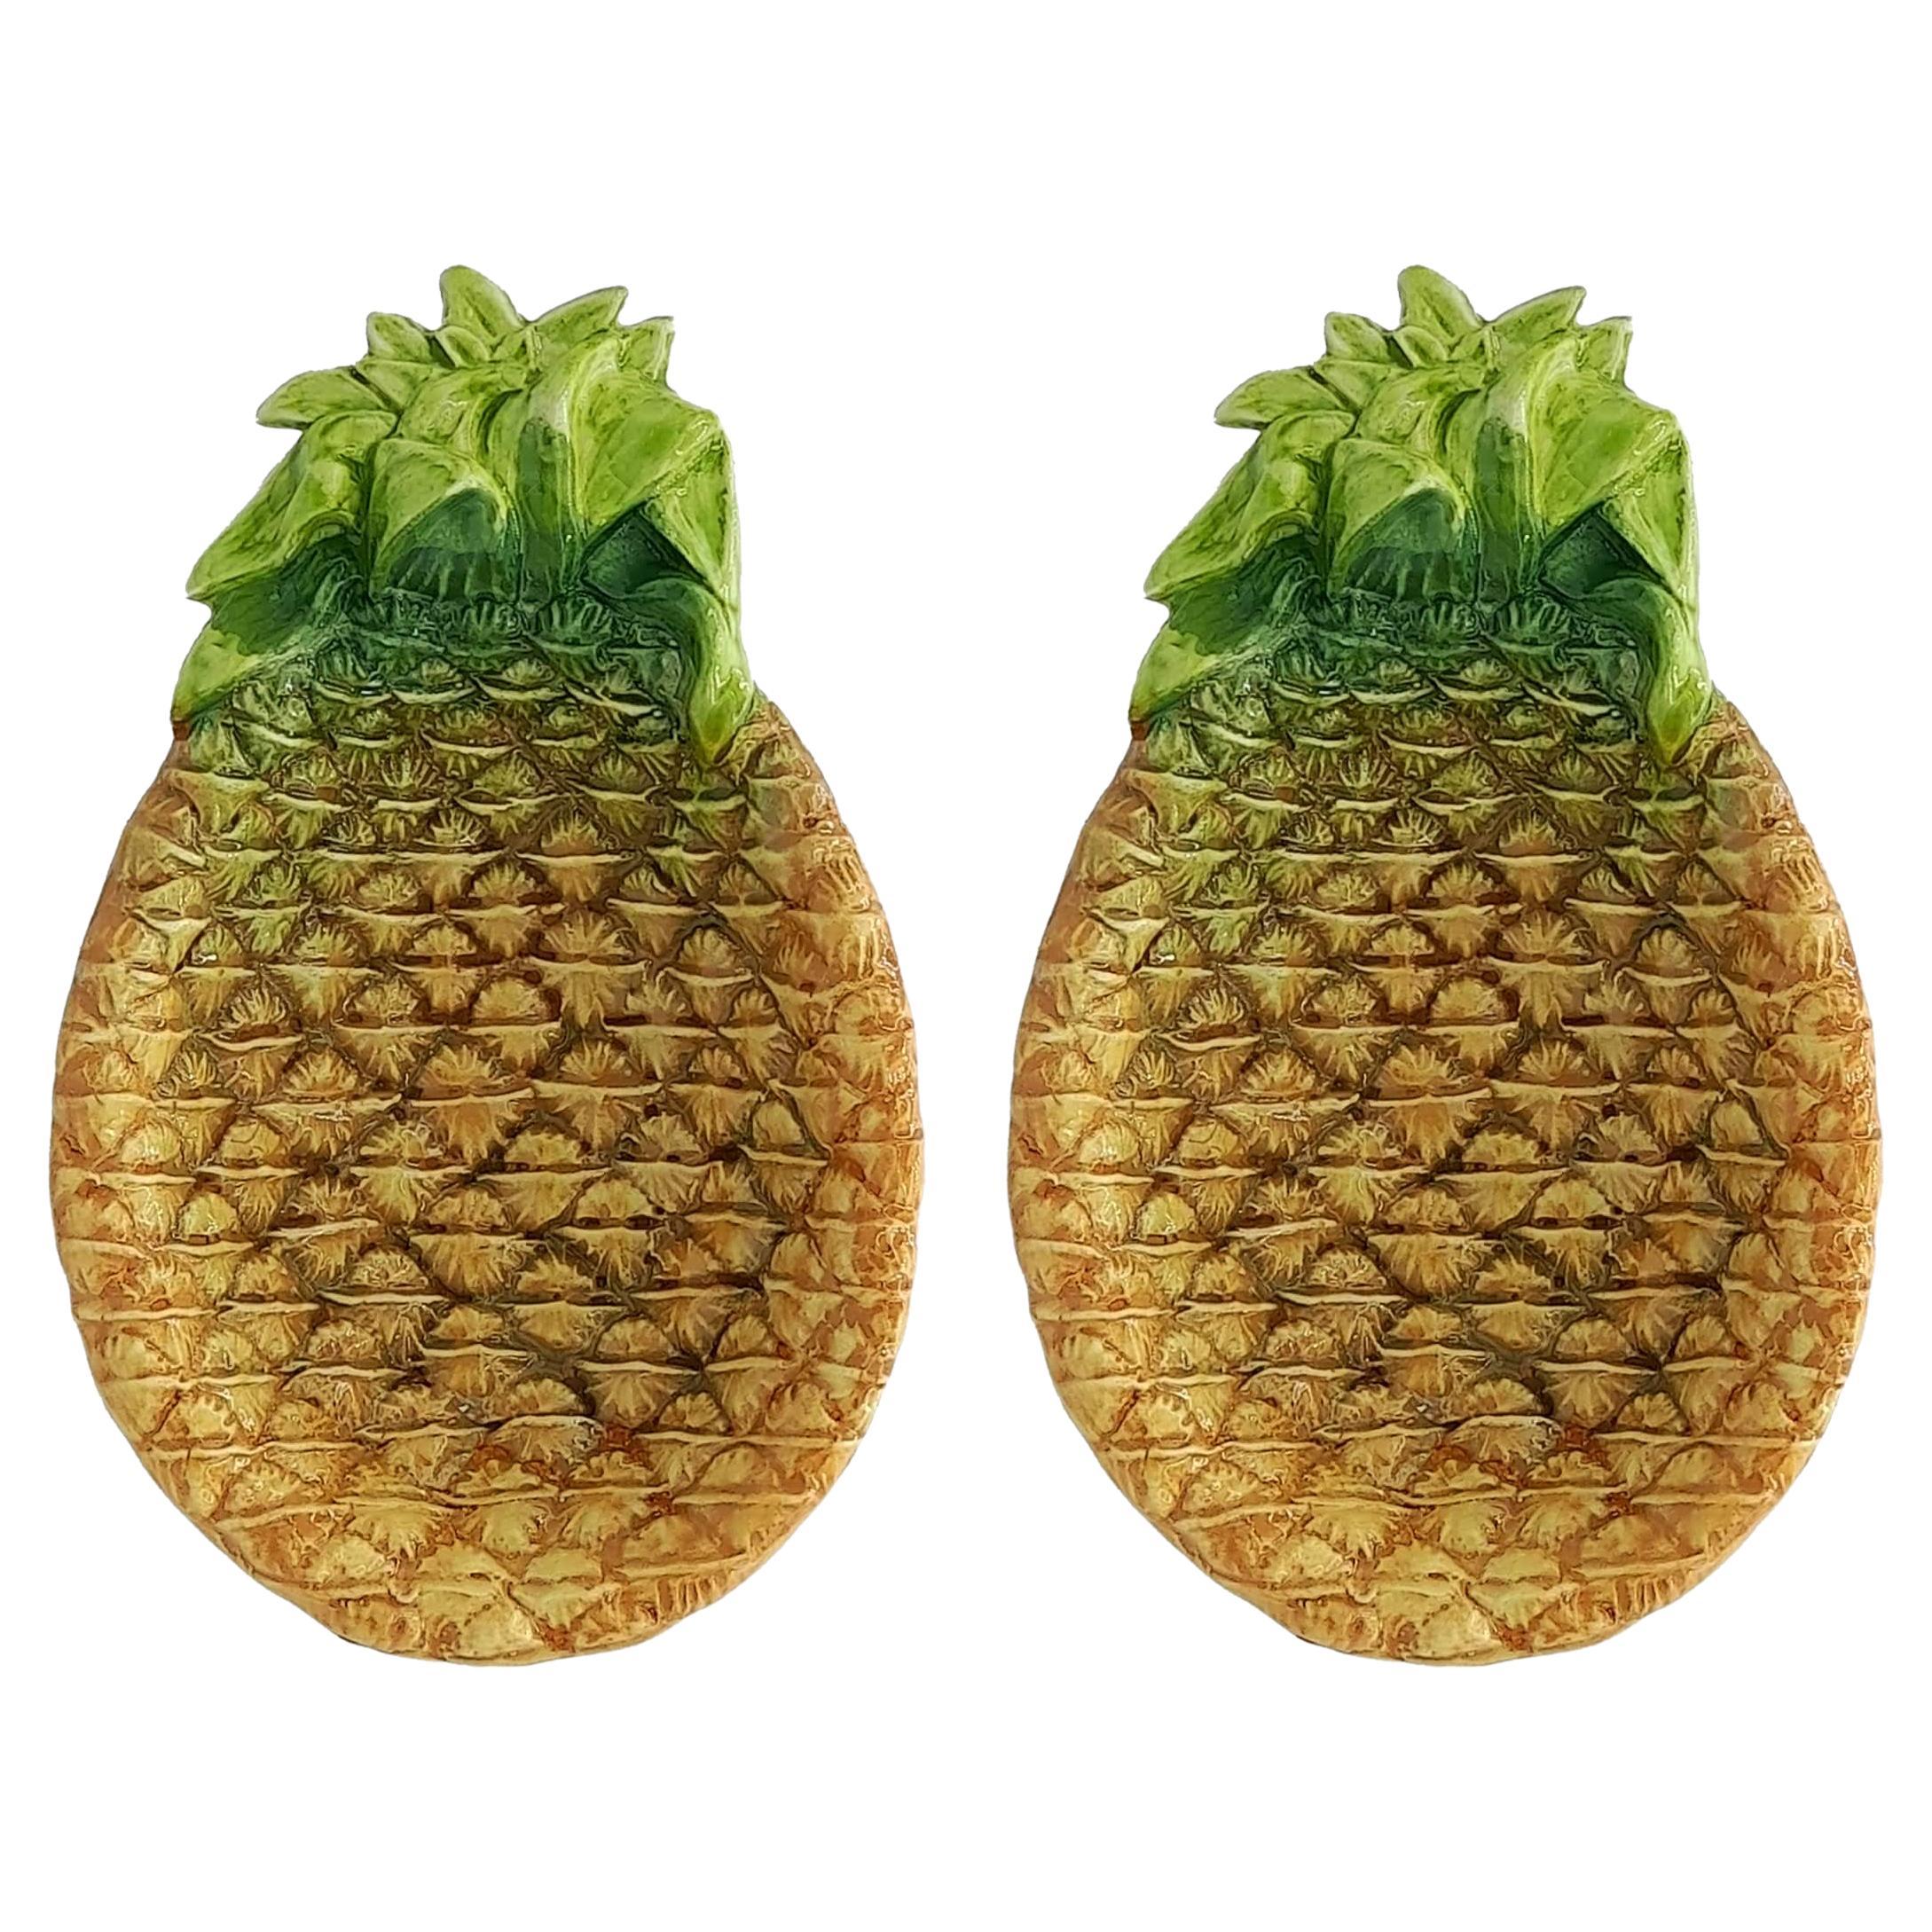 Pineapple Hand Painted Ceramic Starter Set of 2 For Sale